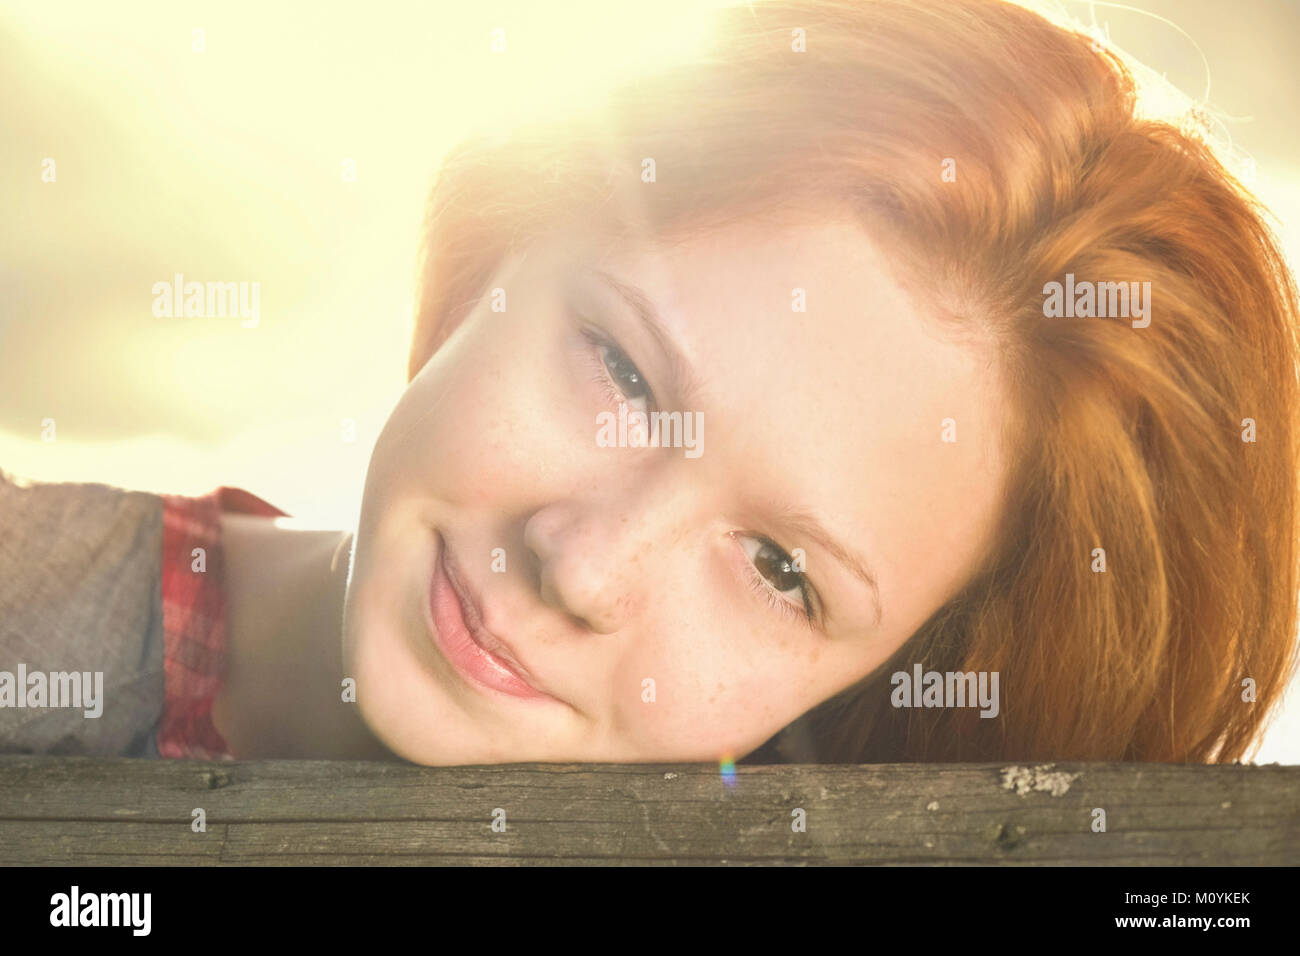 Close up of smiling Caucasian teenage girl Banque D'Images